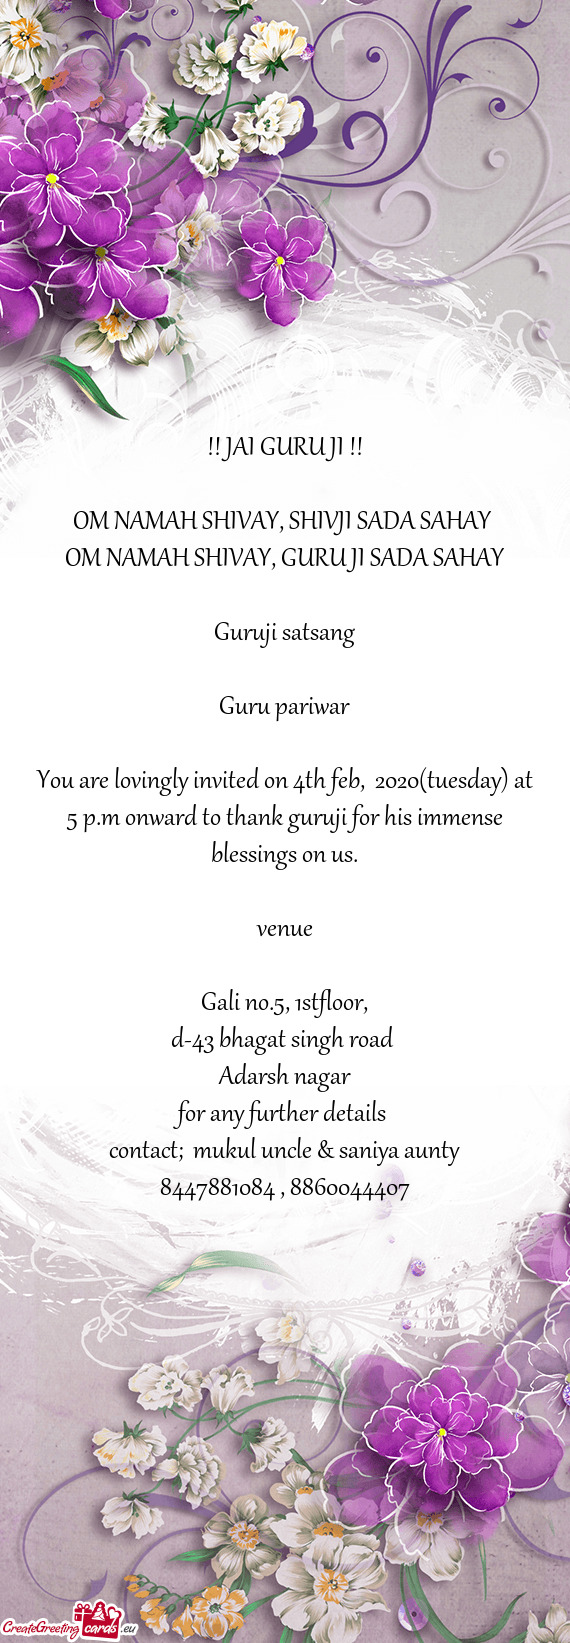 You are lovingly invited on 4th feb, 2020(tuesday) at 5 p.m onward to thank guruji for his immense